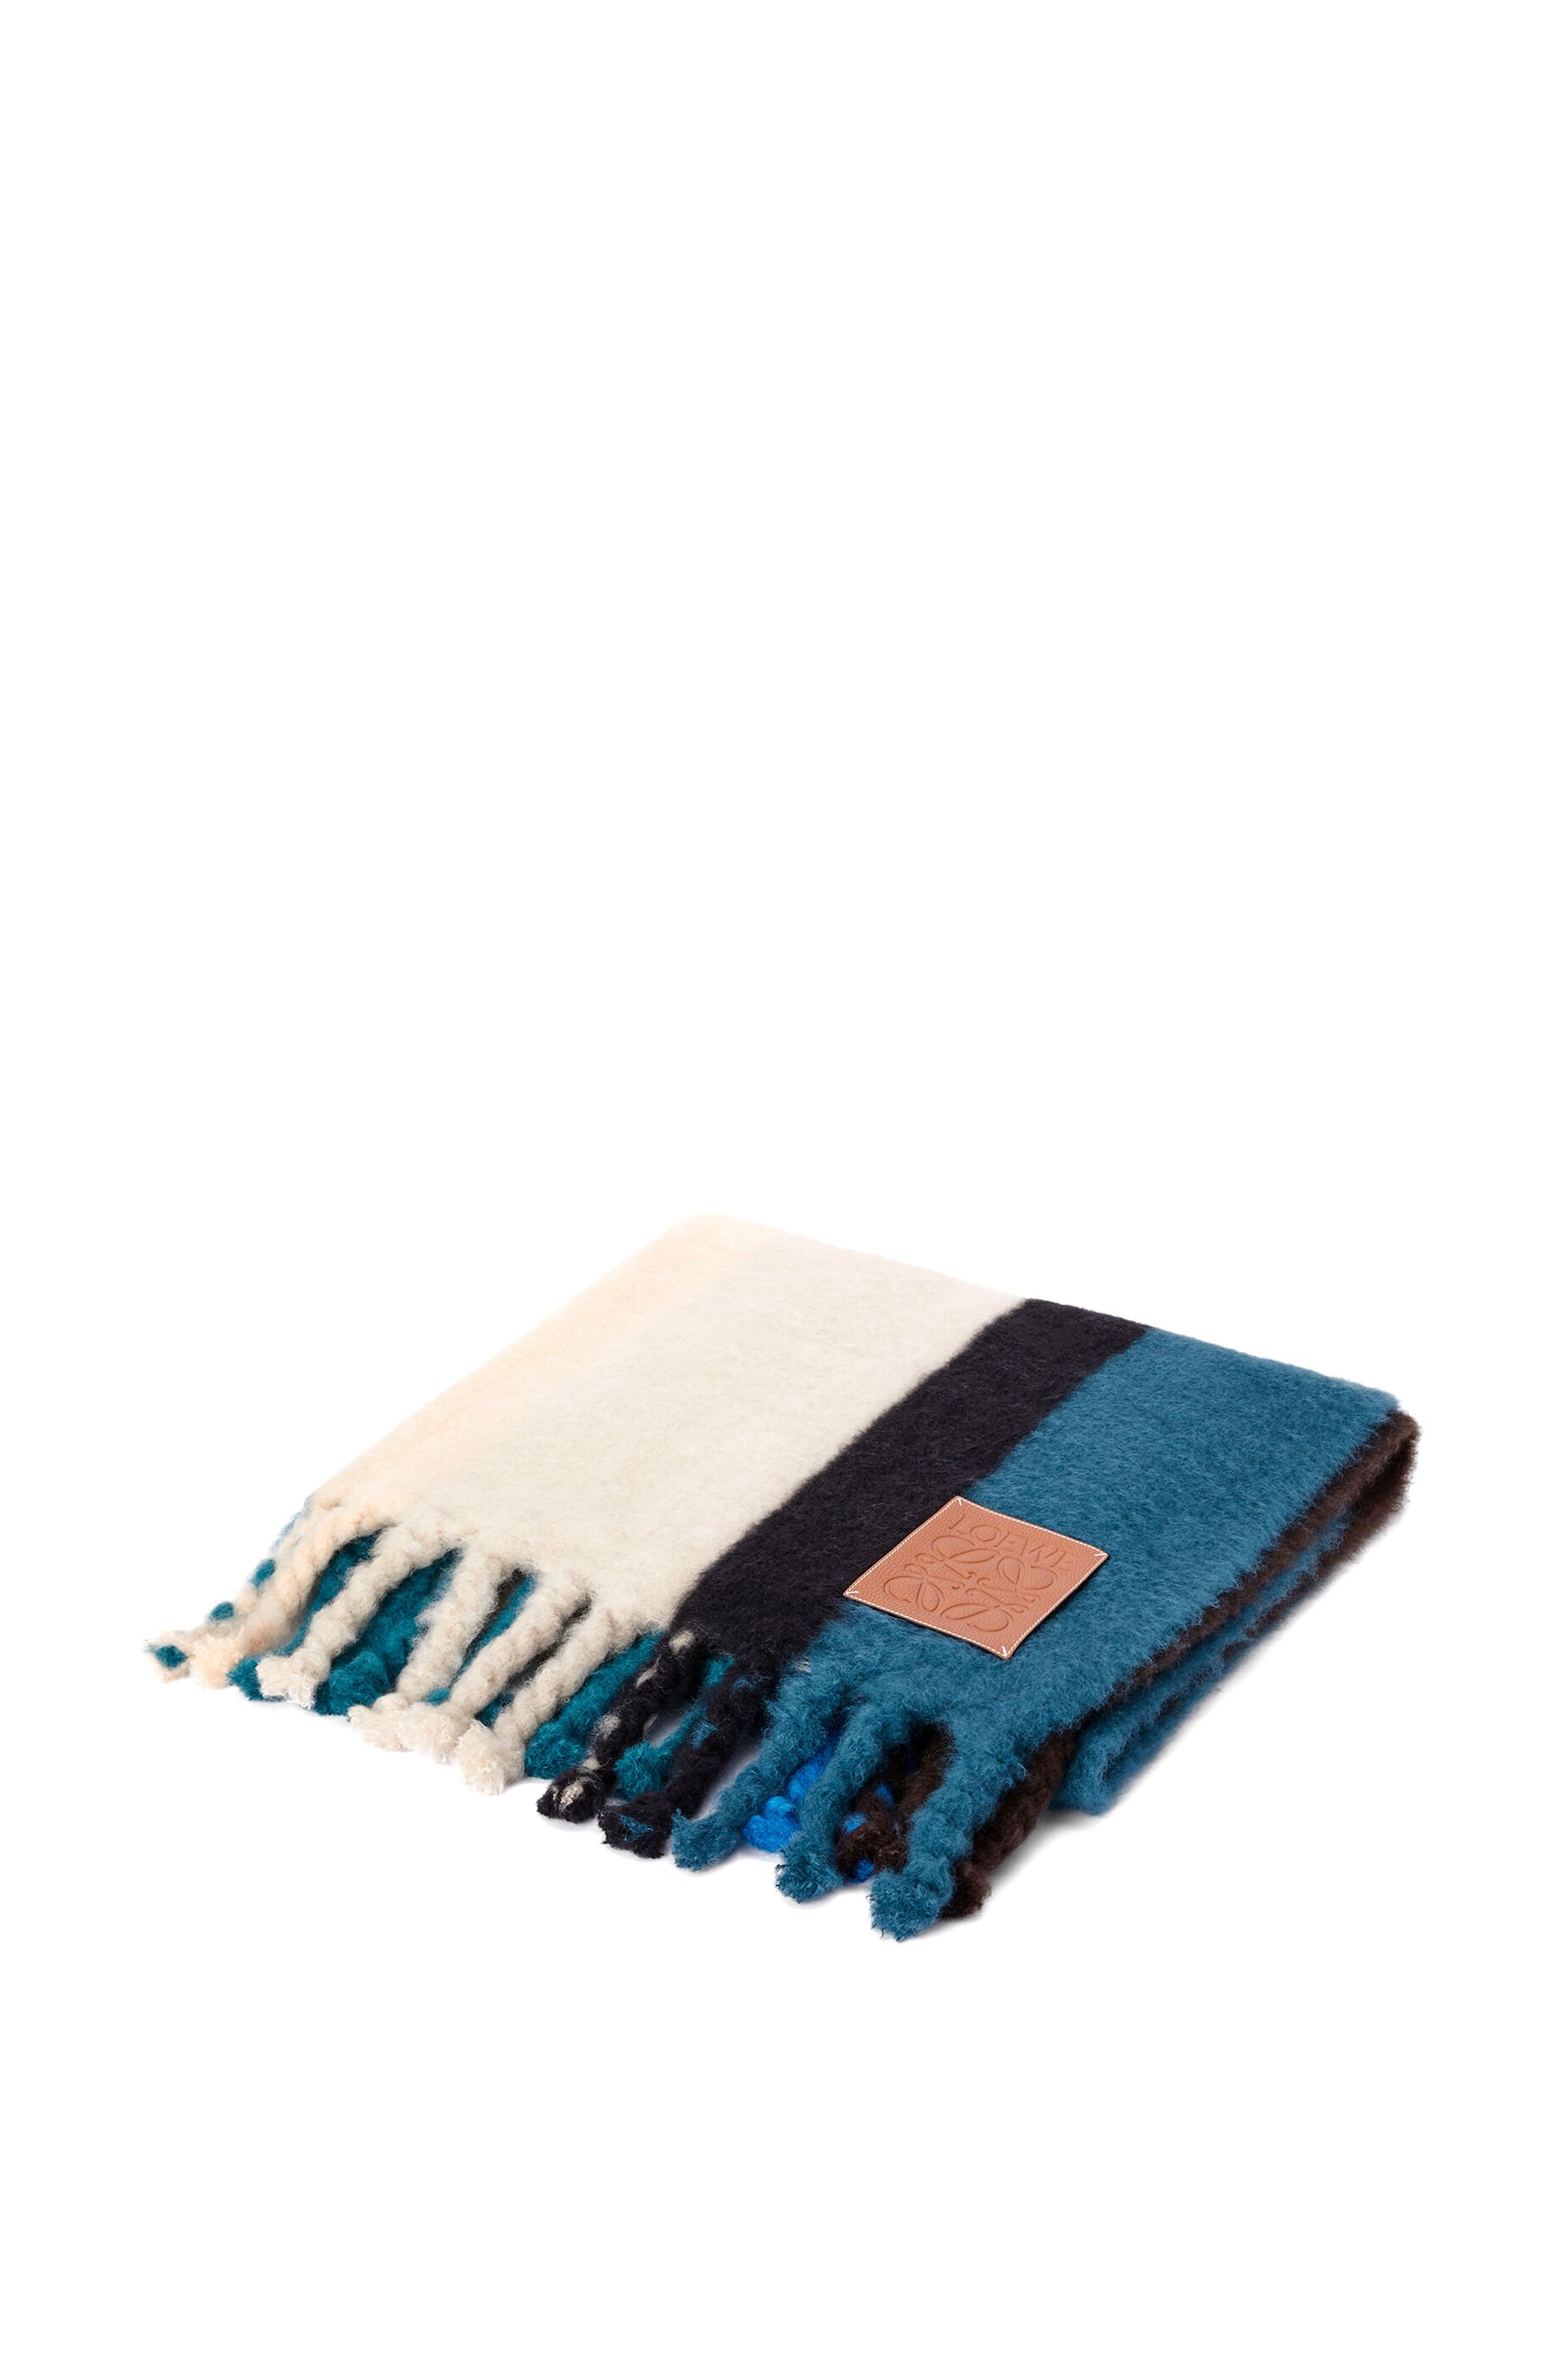 Luxury blankets & throws for women